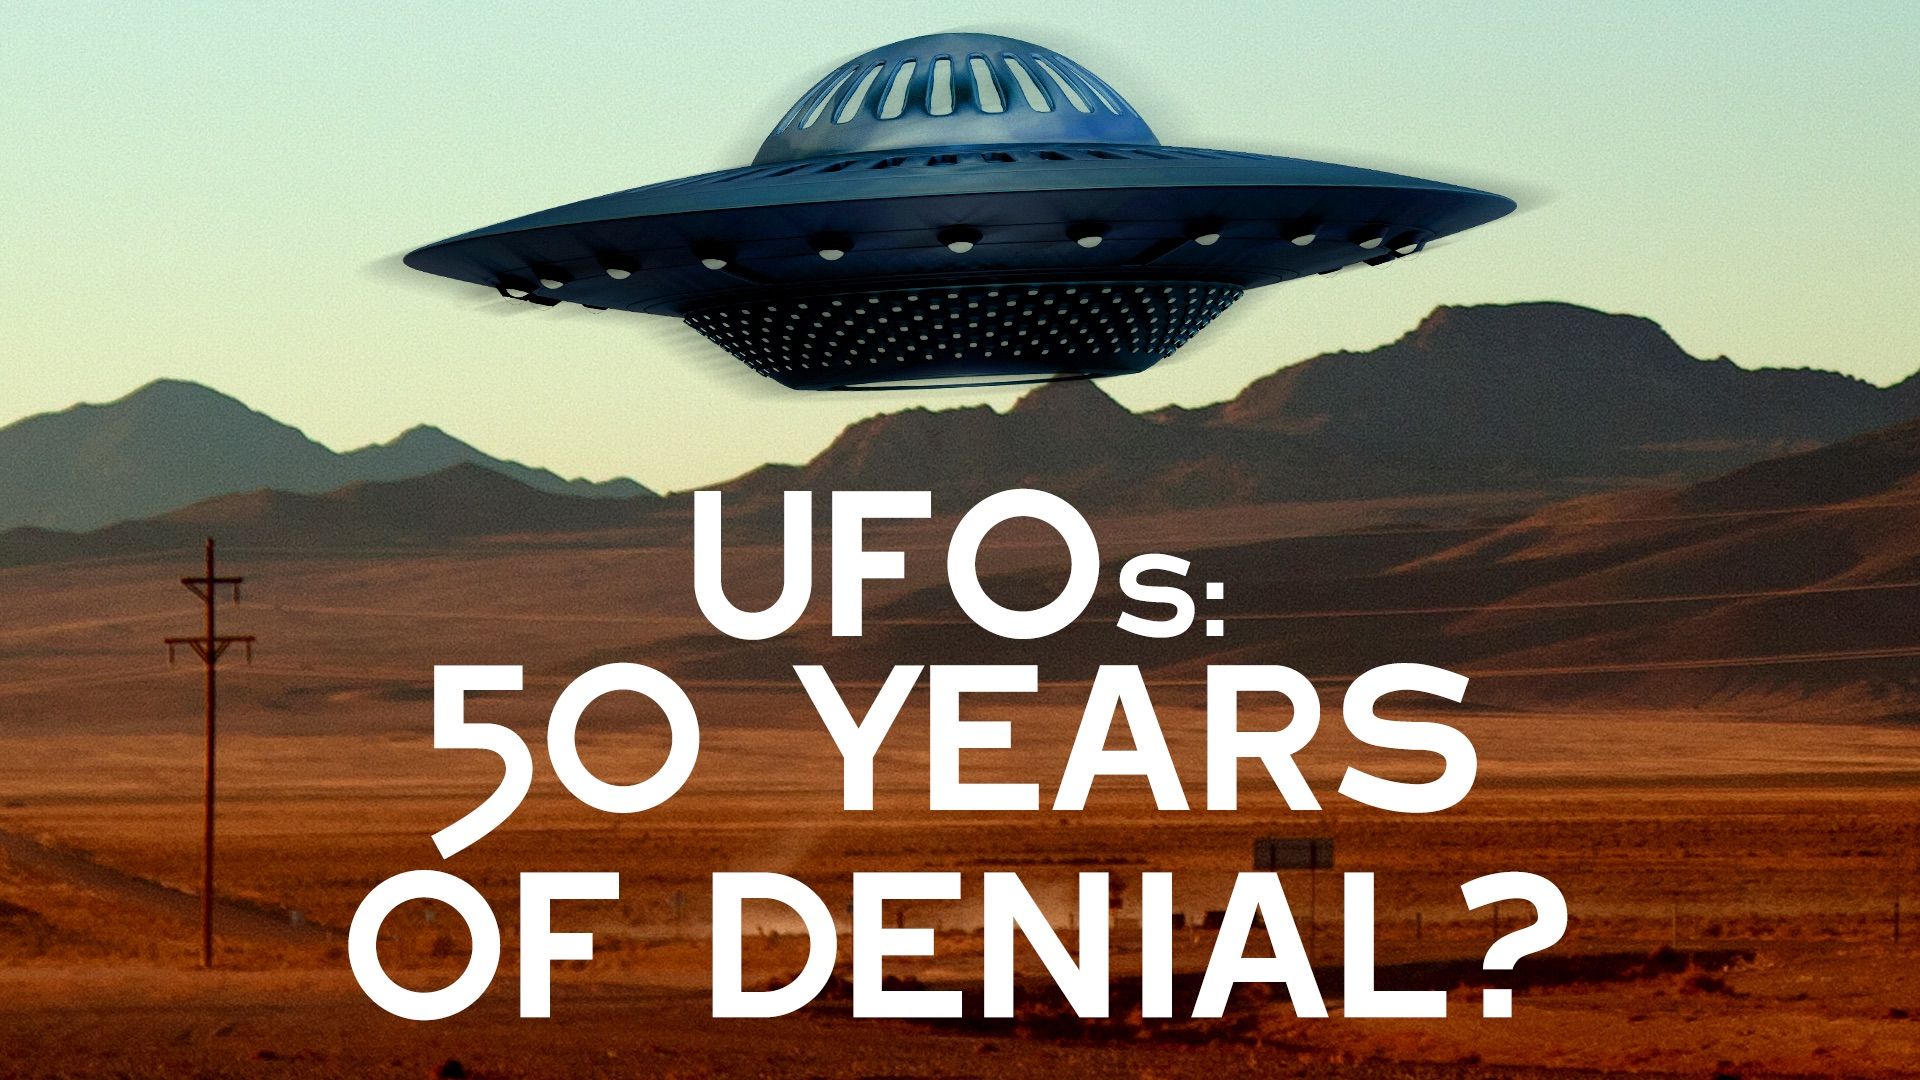 UFOs: 50 Years of Denial? Backdrop